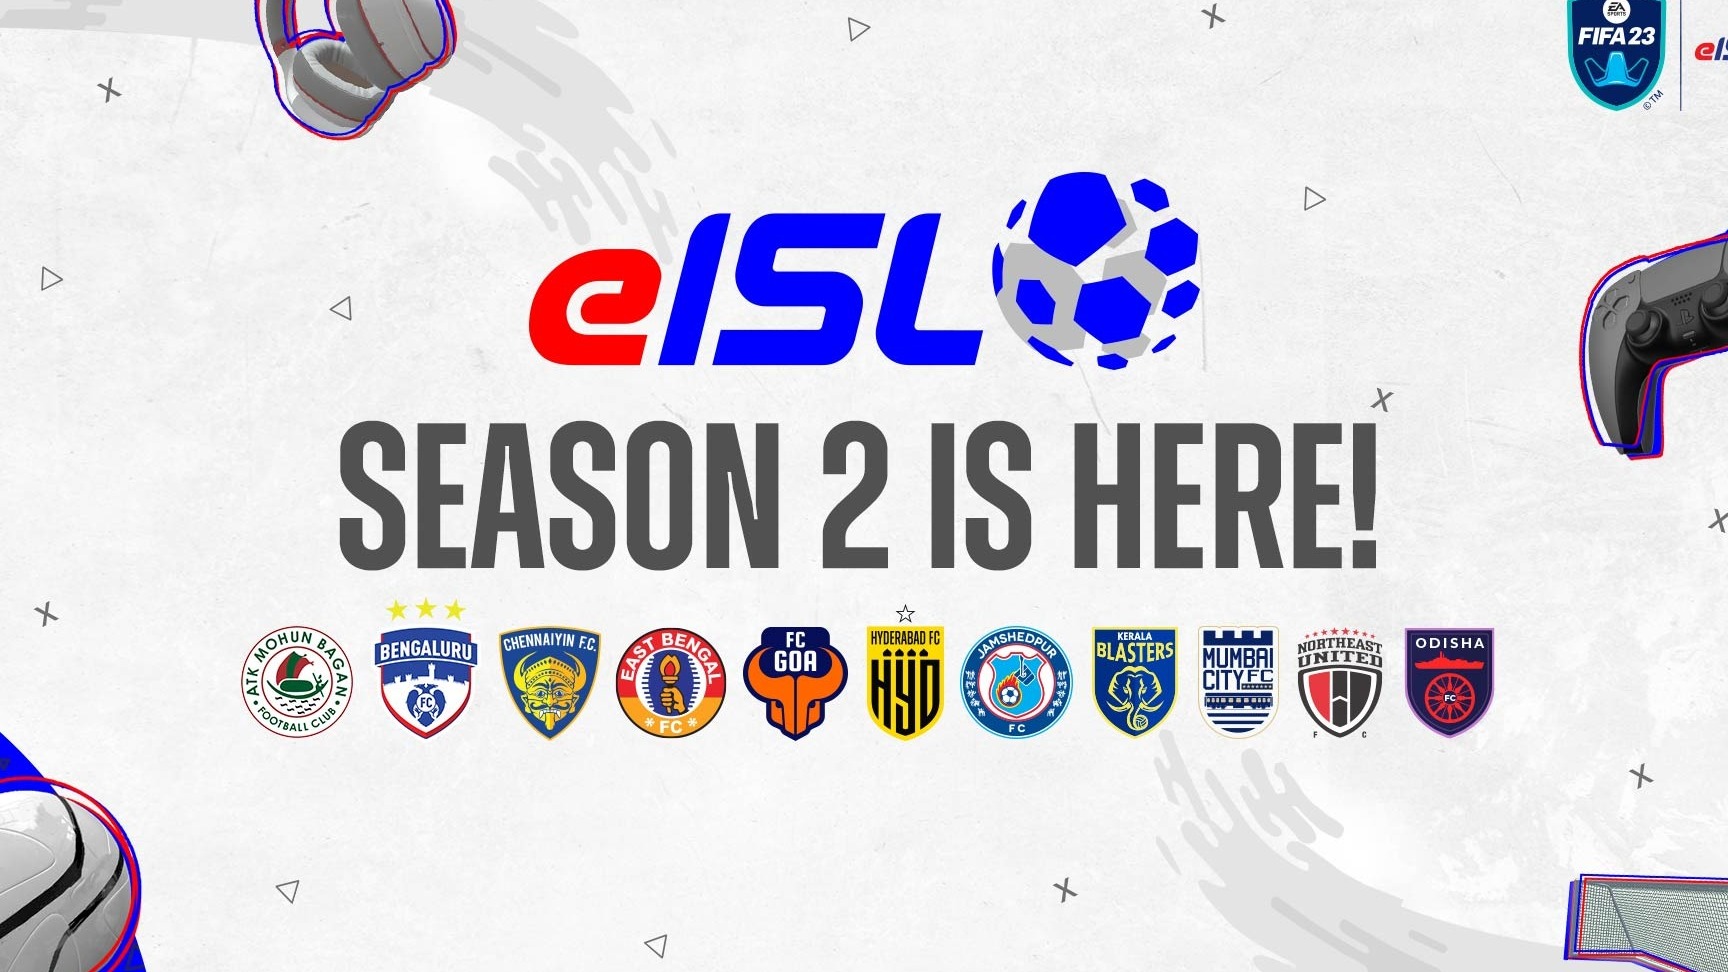 eISL Season 2 Online Qualifiers are set to begin on 22 January, CHECK RULES and How to REGISTER, and all you need to know about eISL 2 Online Qualifiers